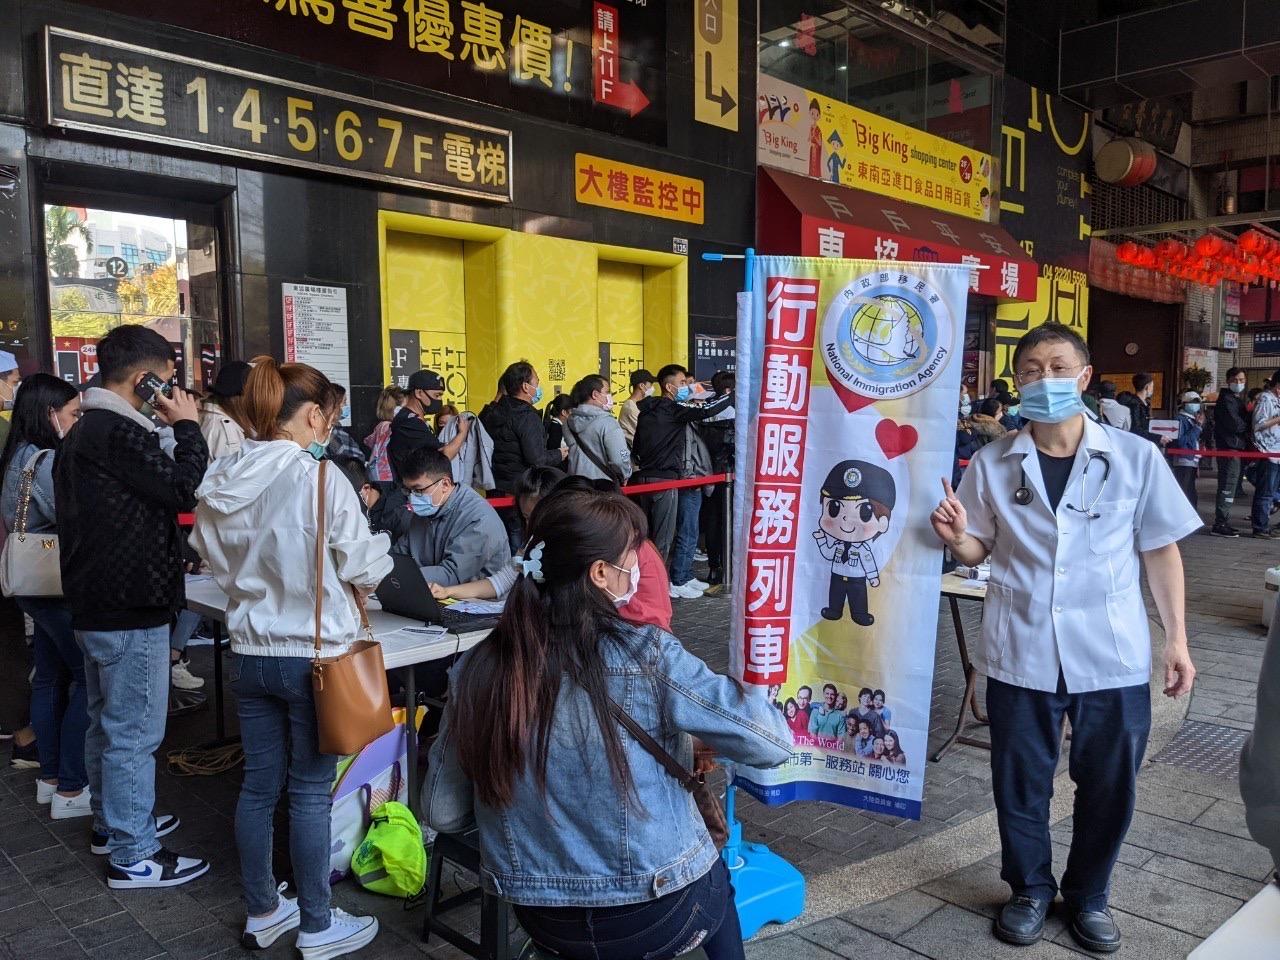 NIA personnel visited food stalls around Taichung ASEAN Square to promote “Prevention from African swine fever”. (Photo / Provided by Taichung City First Service Center)